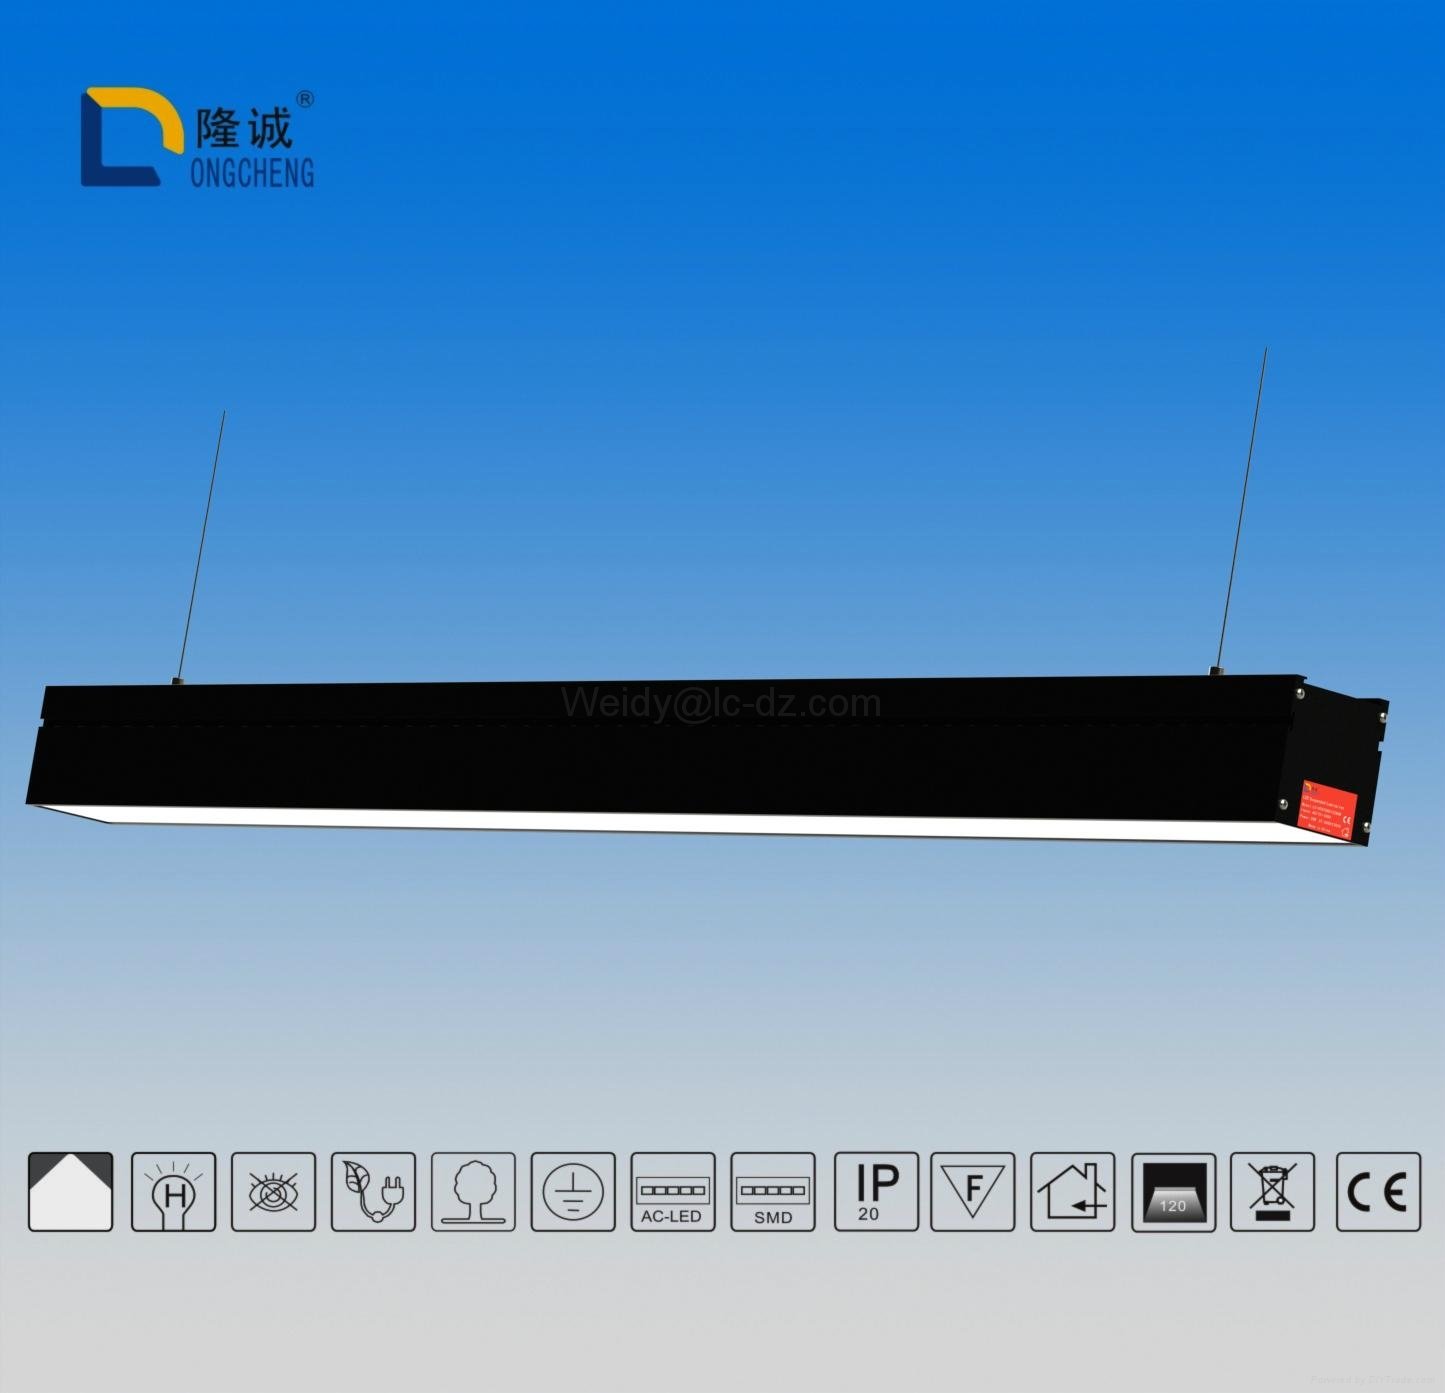 SMD chip DALI dimming system for linear office lamps